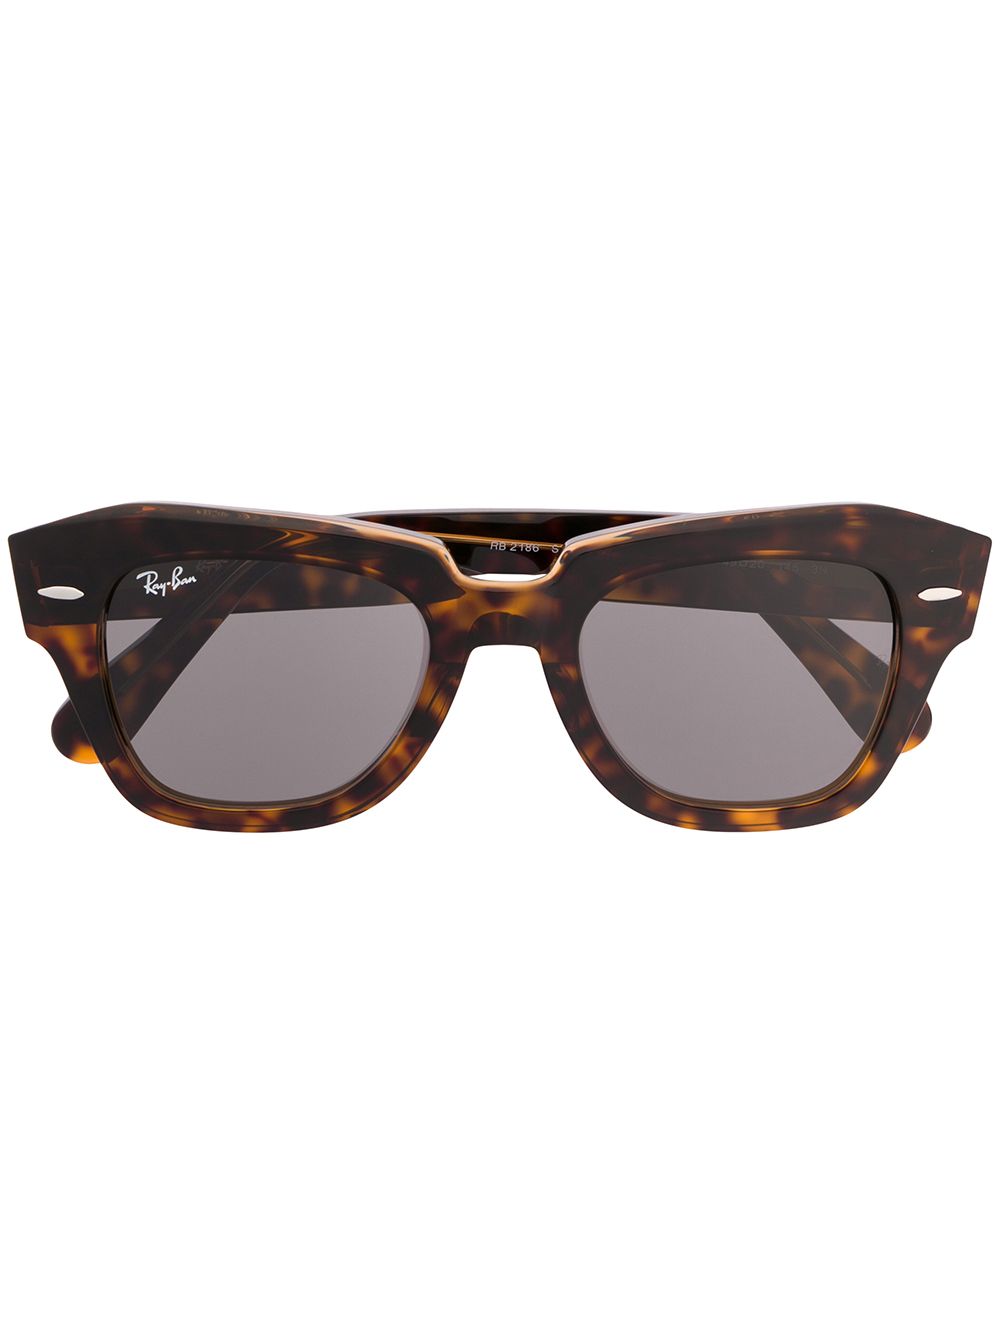 Ray-Ban State Street square-frame sunglasses - Brown von Ray-Ban